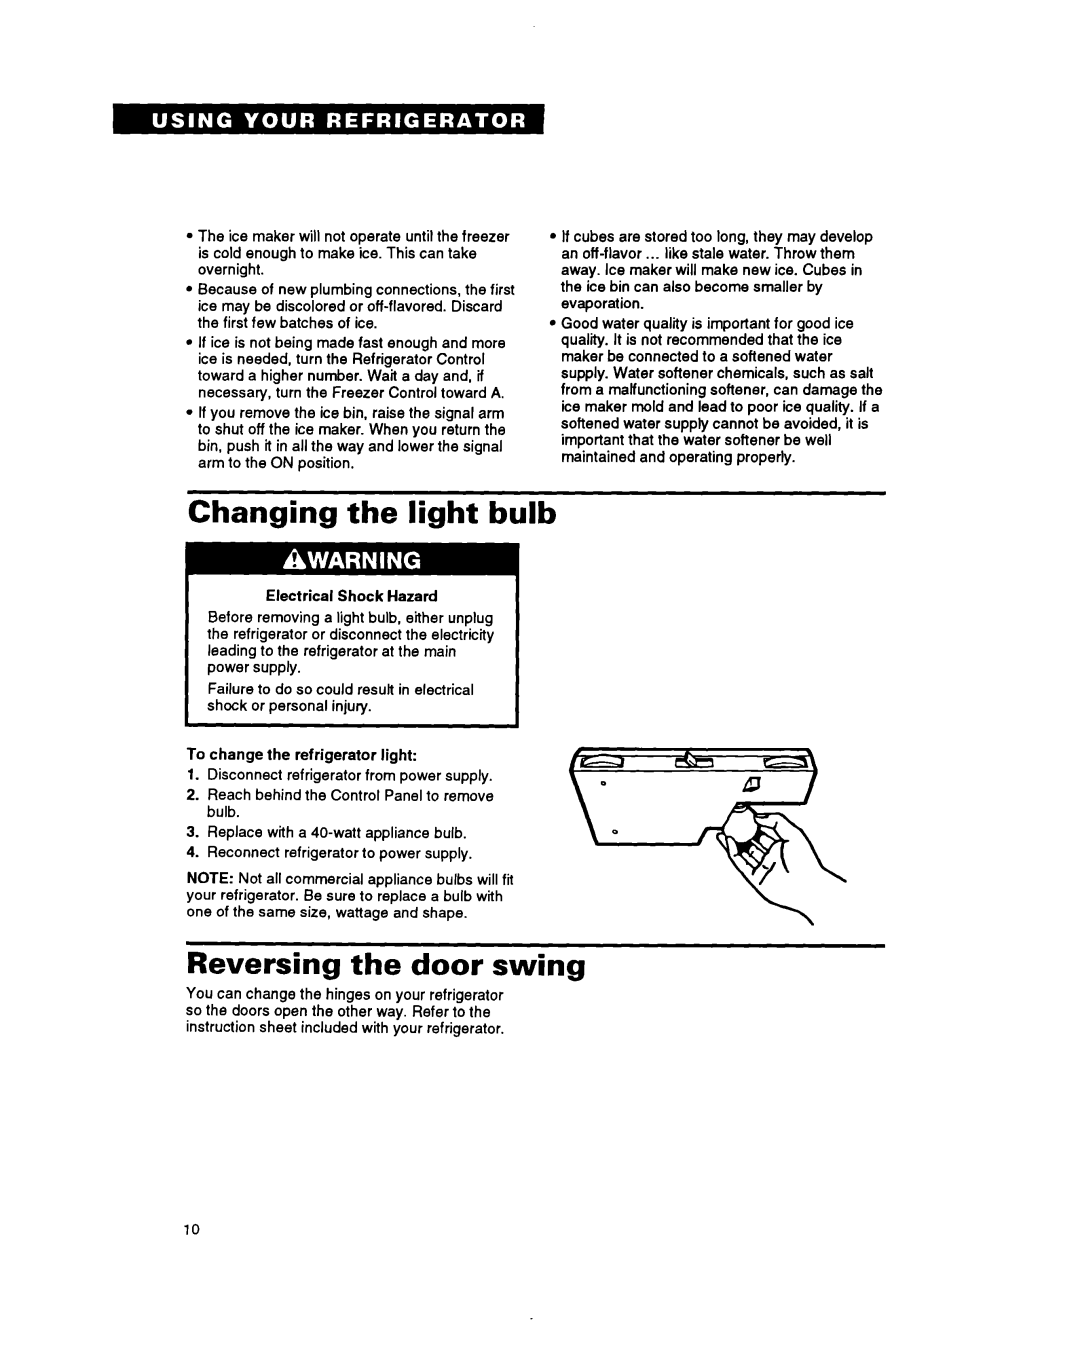 Whirlpool RTIZDK important safety instructions Changing the light bulb, Reversing the door swing 